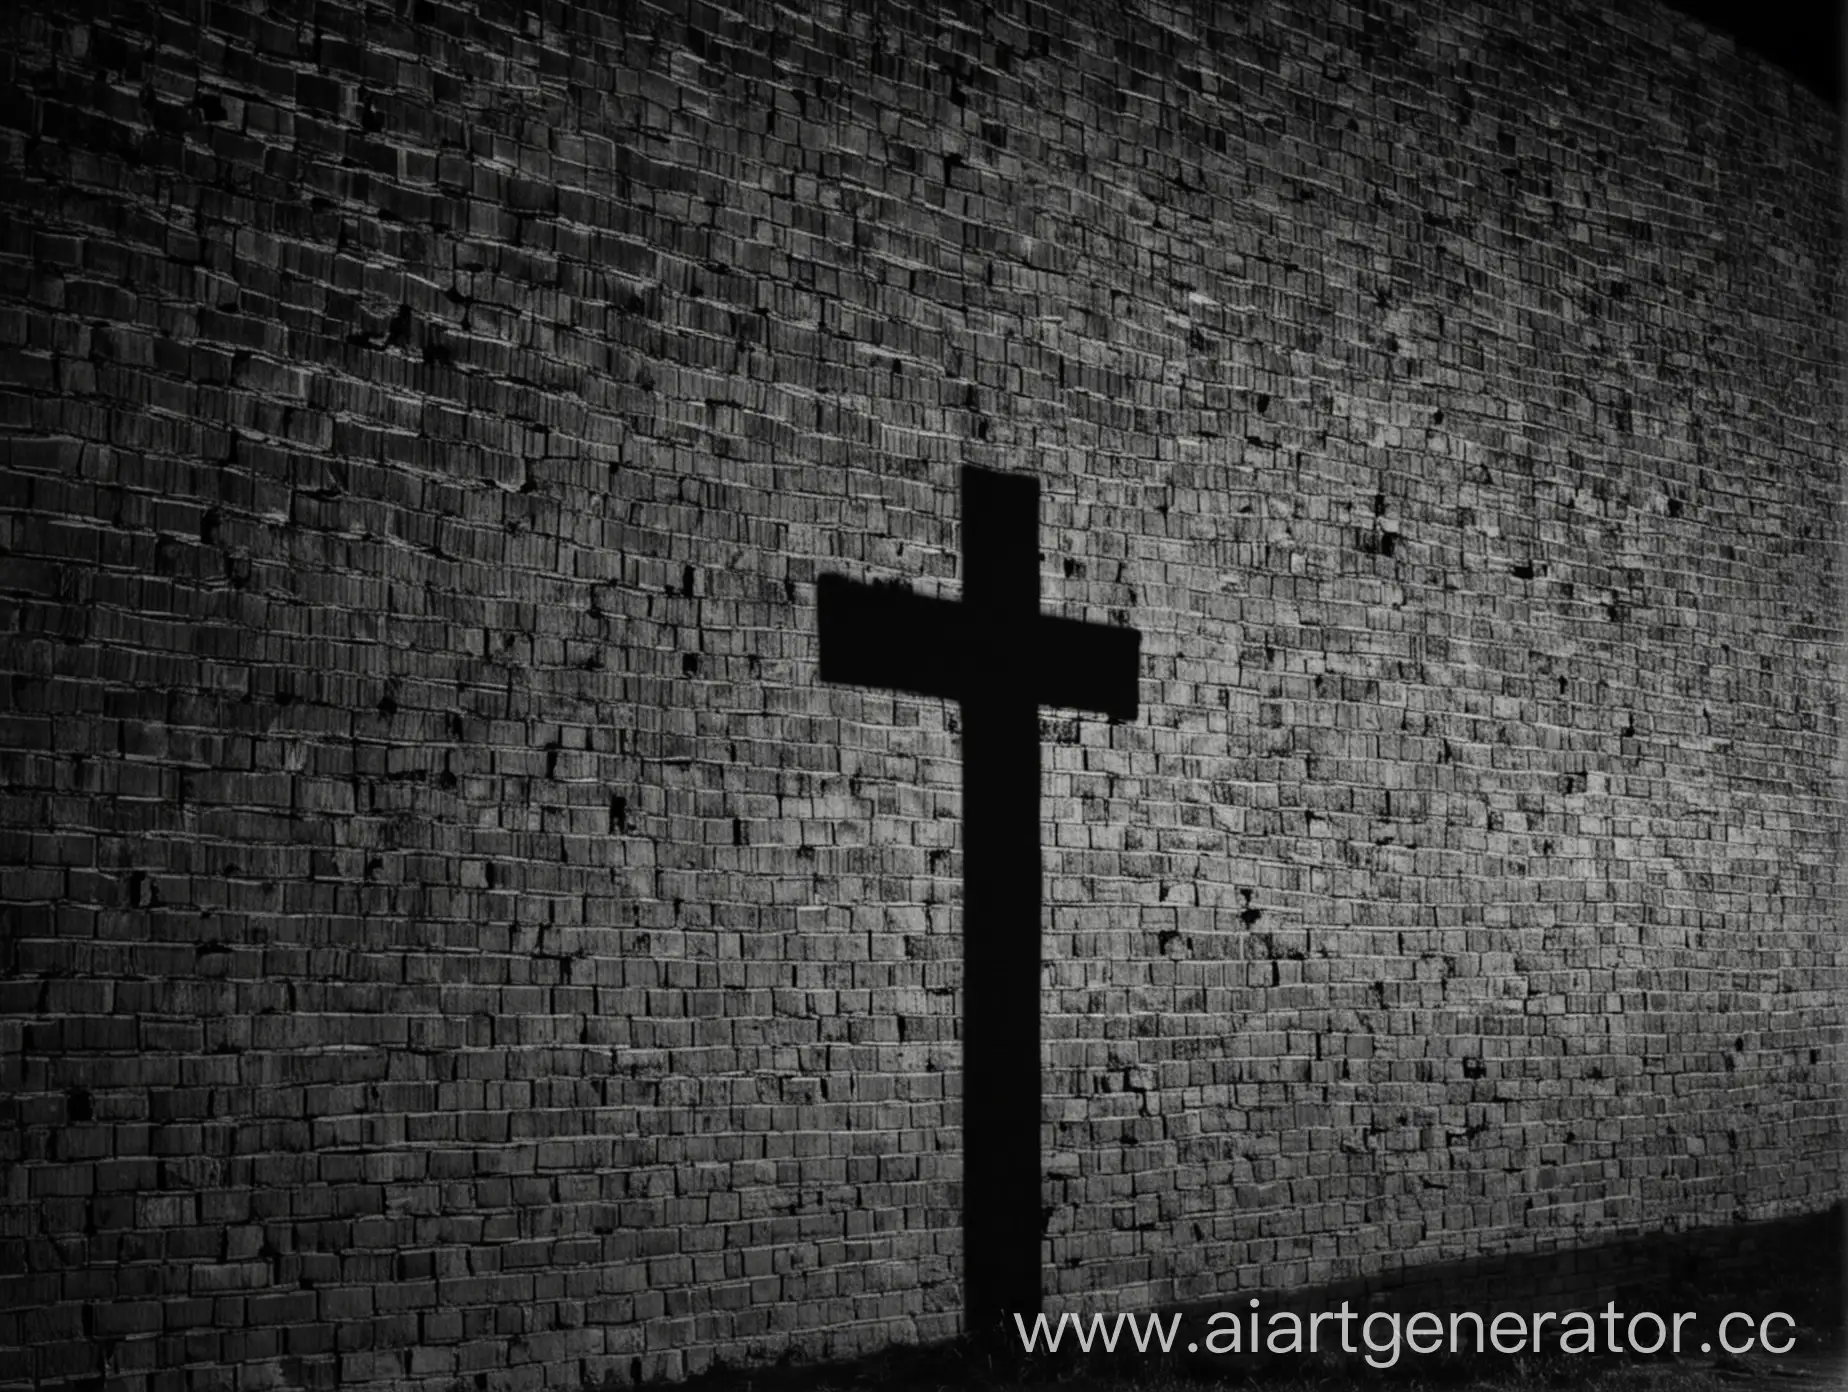 Nighttime-Brick-Wall-with-Cross-Shadow-Realistic-Black-and-White-Urban-Scene